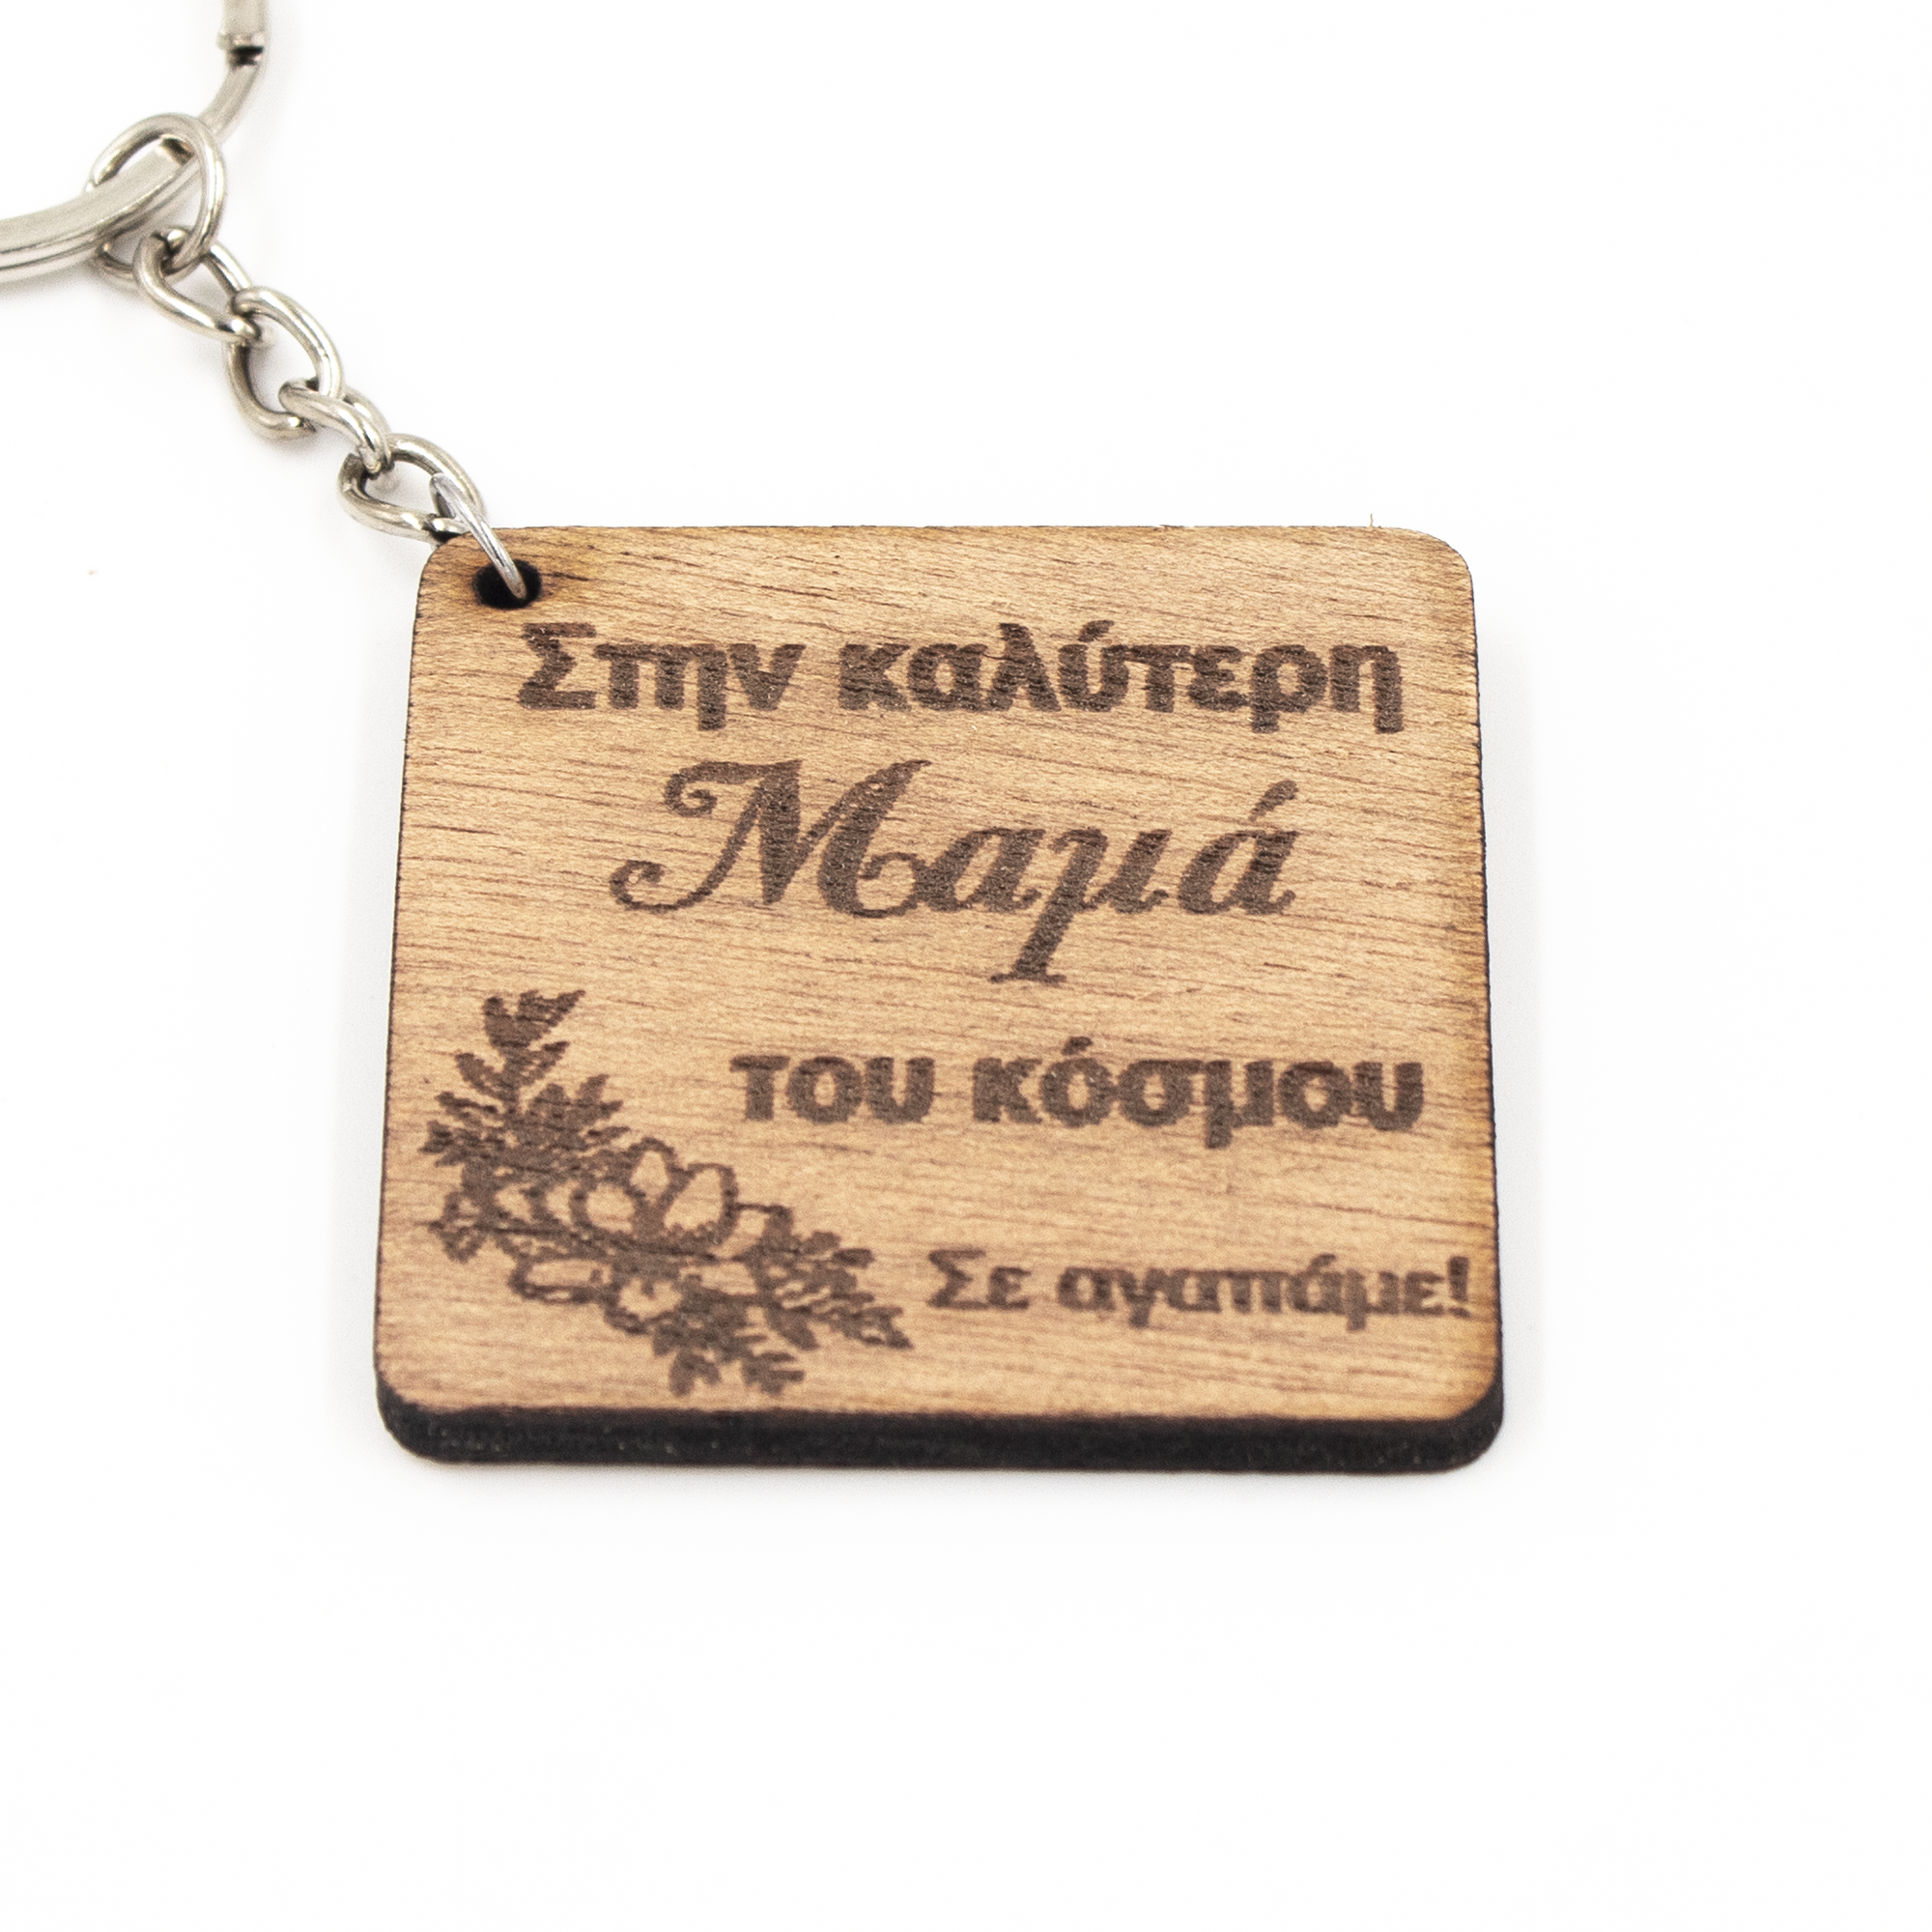 "High-quality wooden keyring with heartfelt message - perfect gift for moms on Mother's Day or any occasion. Use it as an accessory for keys, purses, or bags and show your love and appreciation.